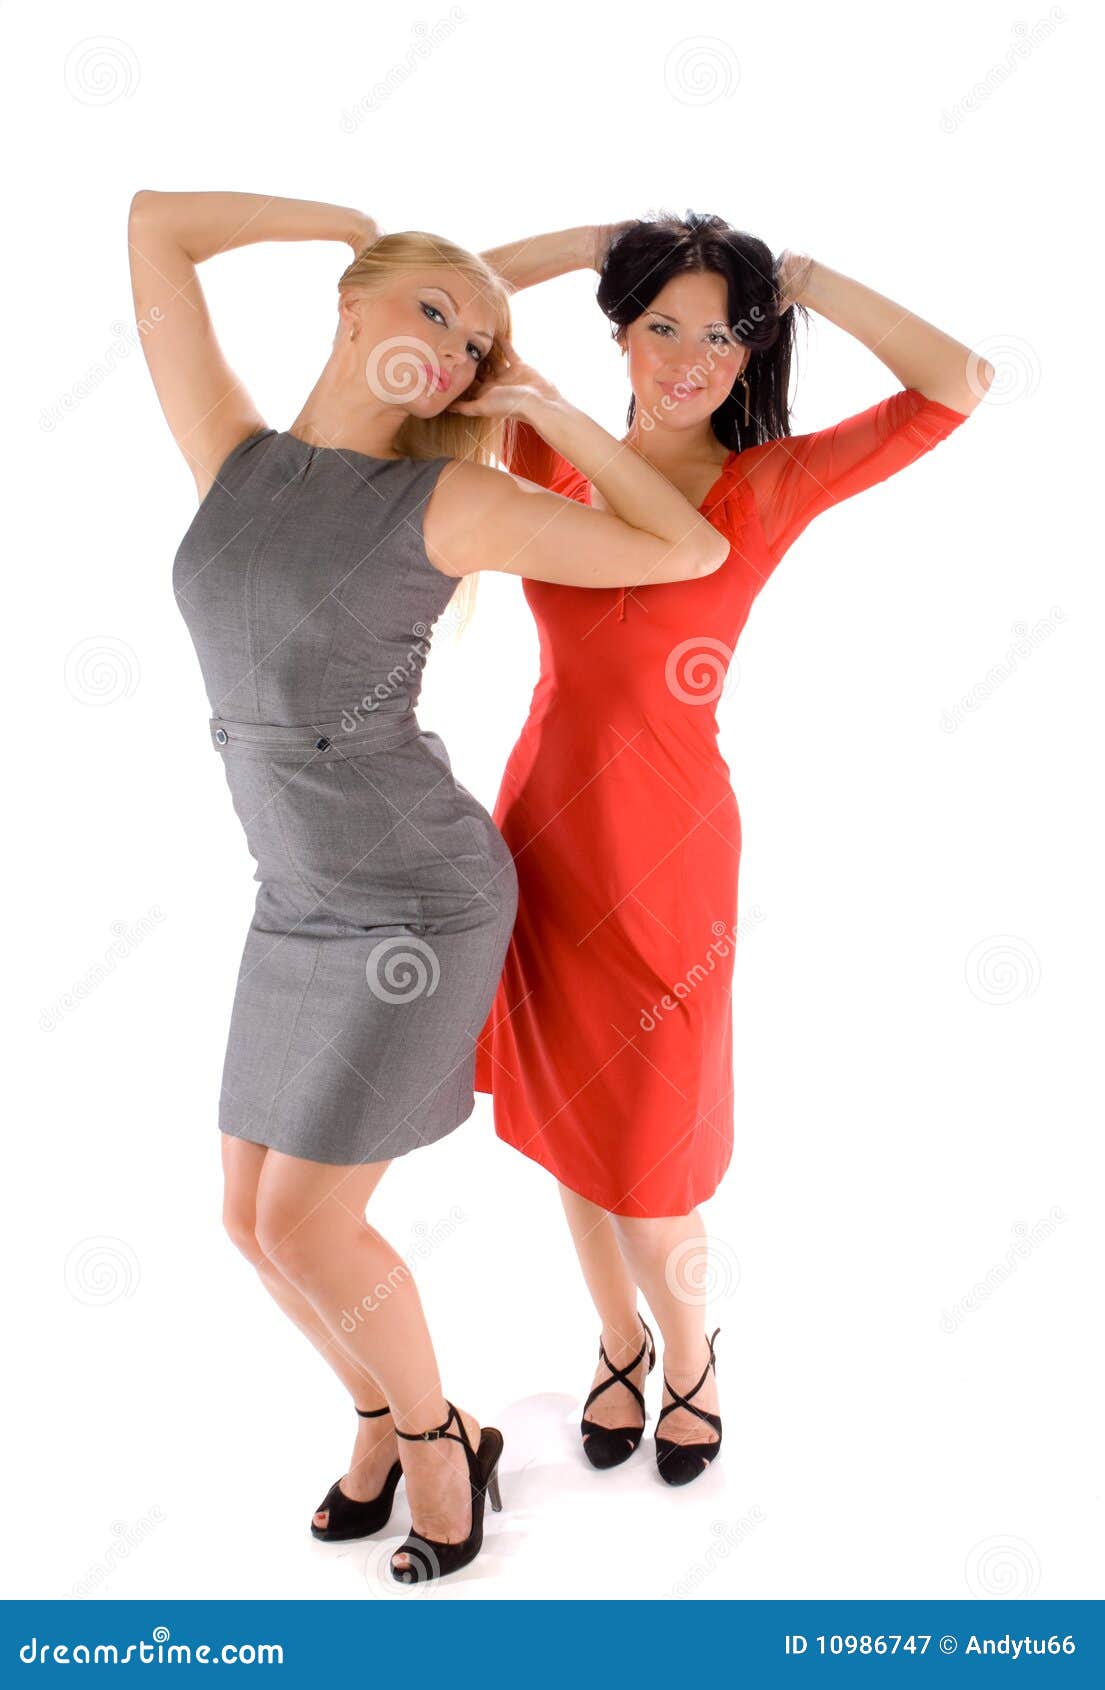 Couple of hot ladies stock image. Image of lady, group - 10986747